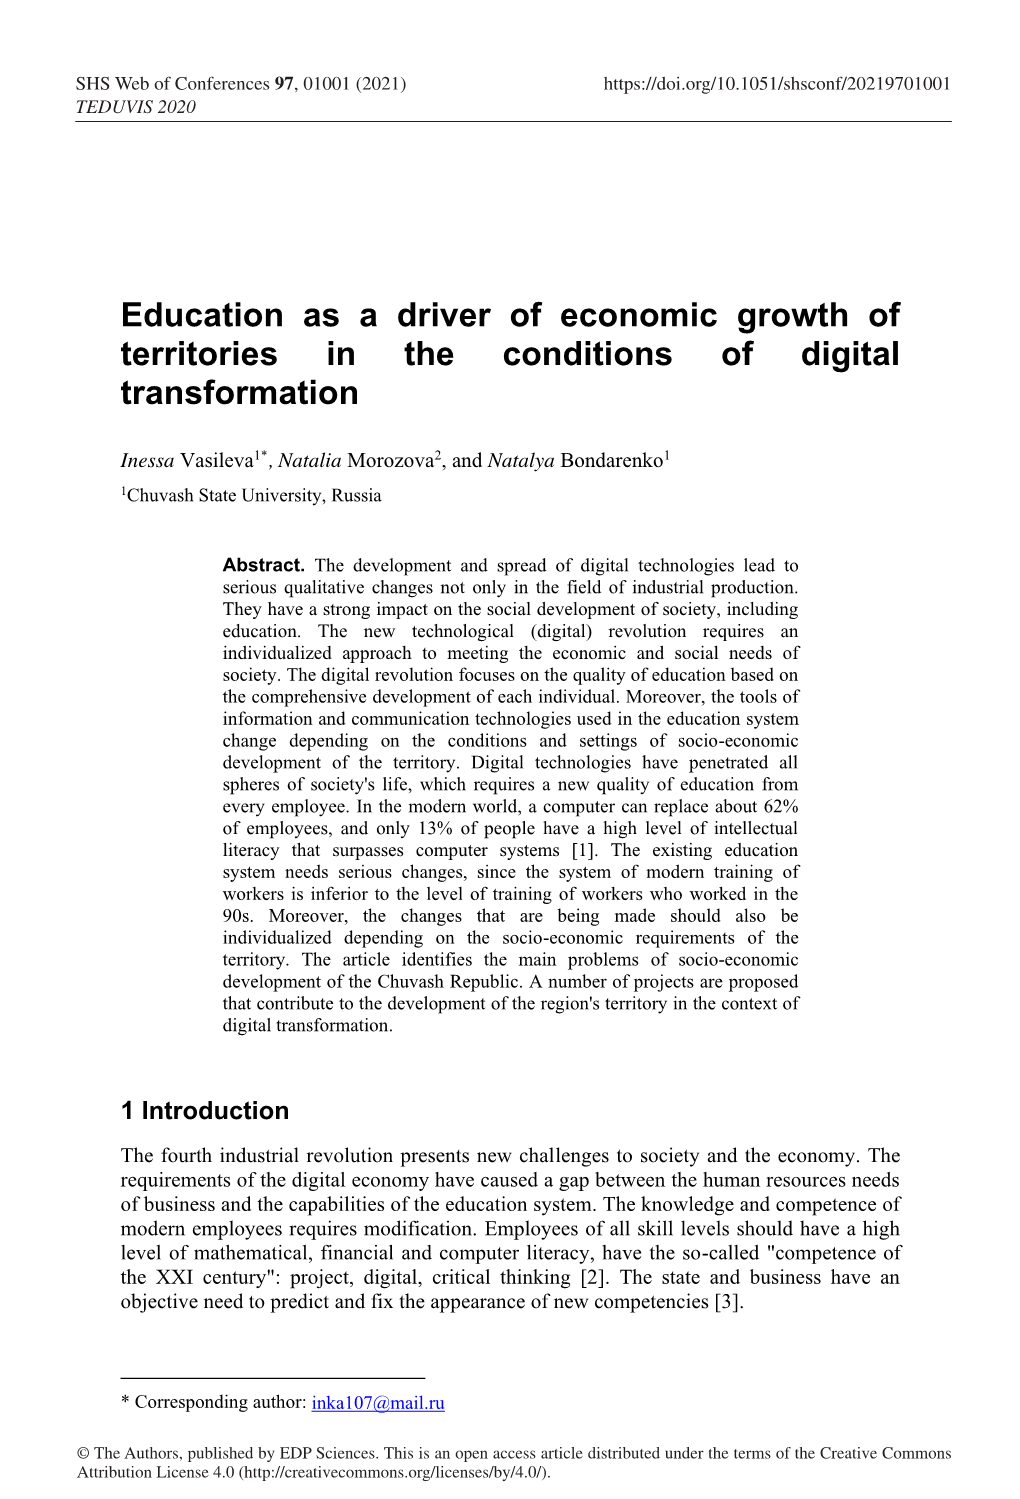 Education As a Driver of Economic Growth of Territories in the Conditions of Digital Transformation